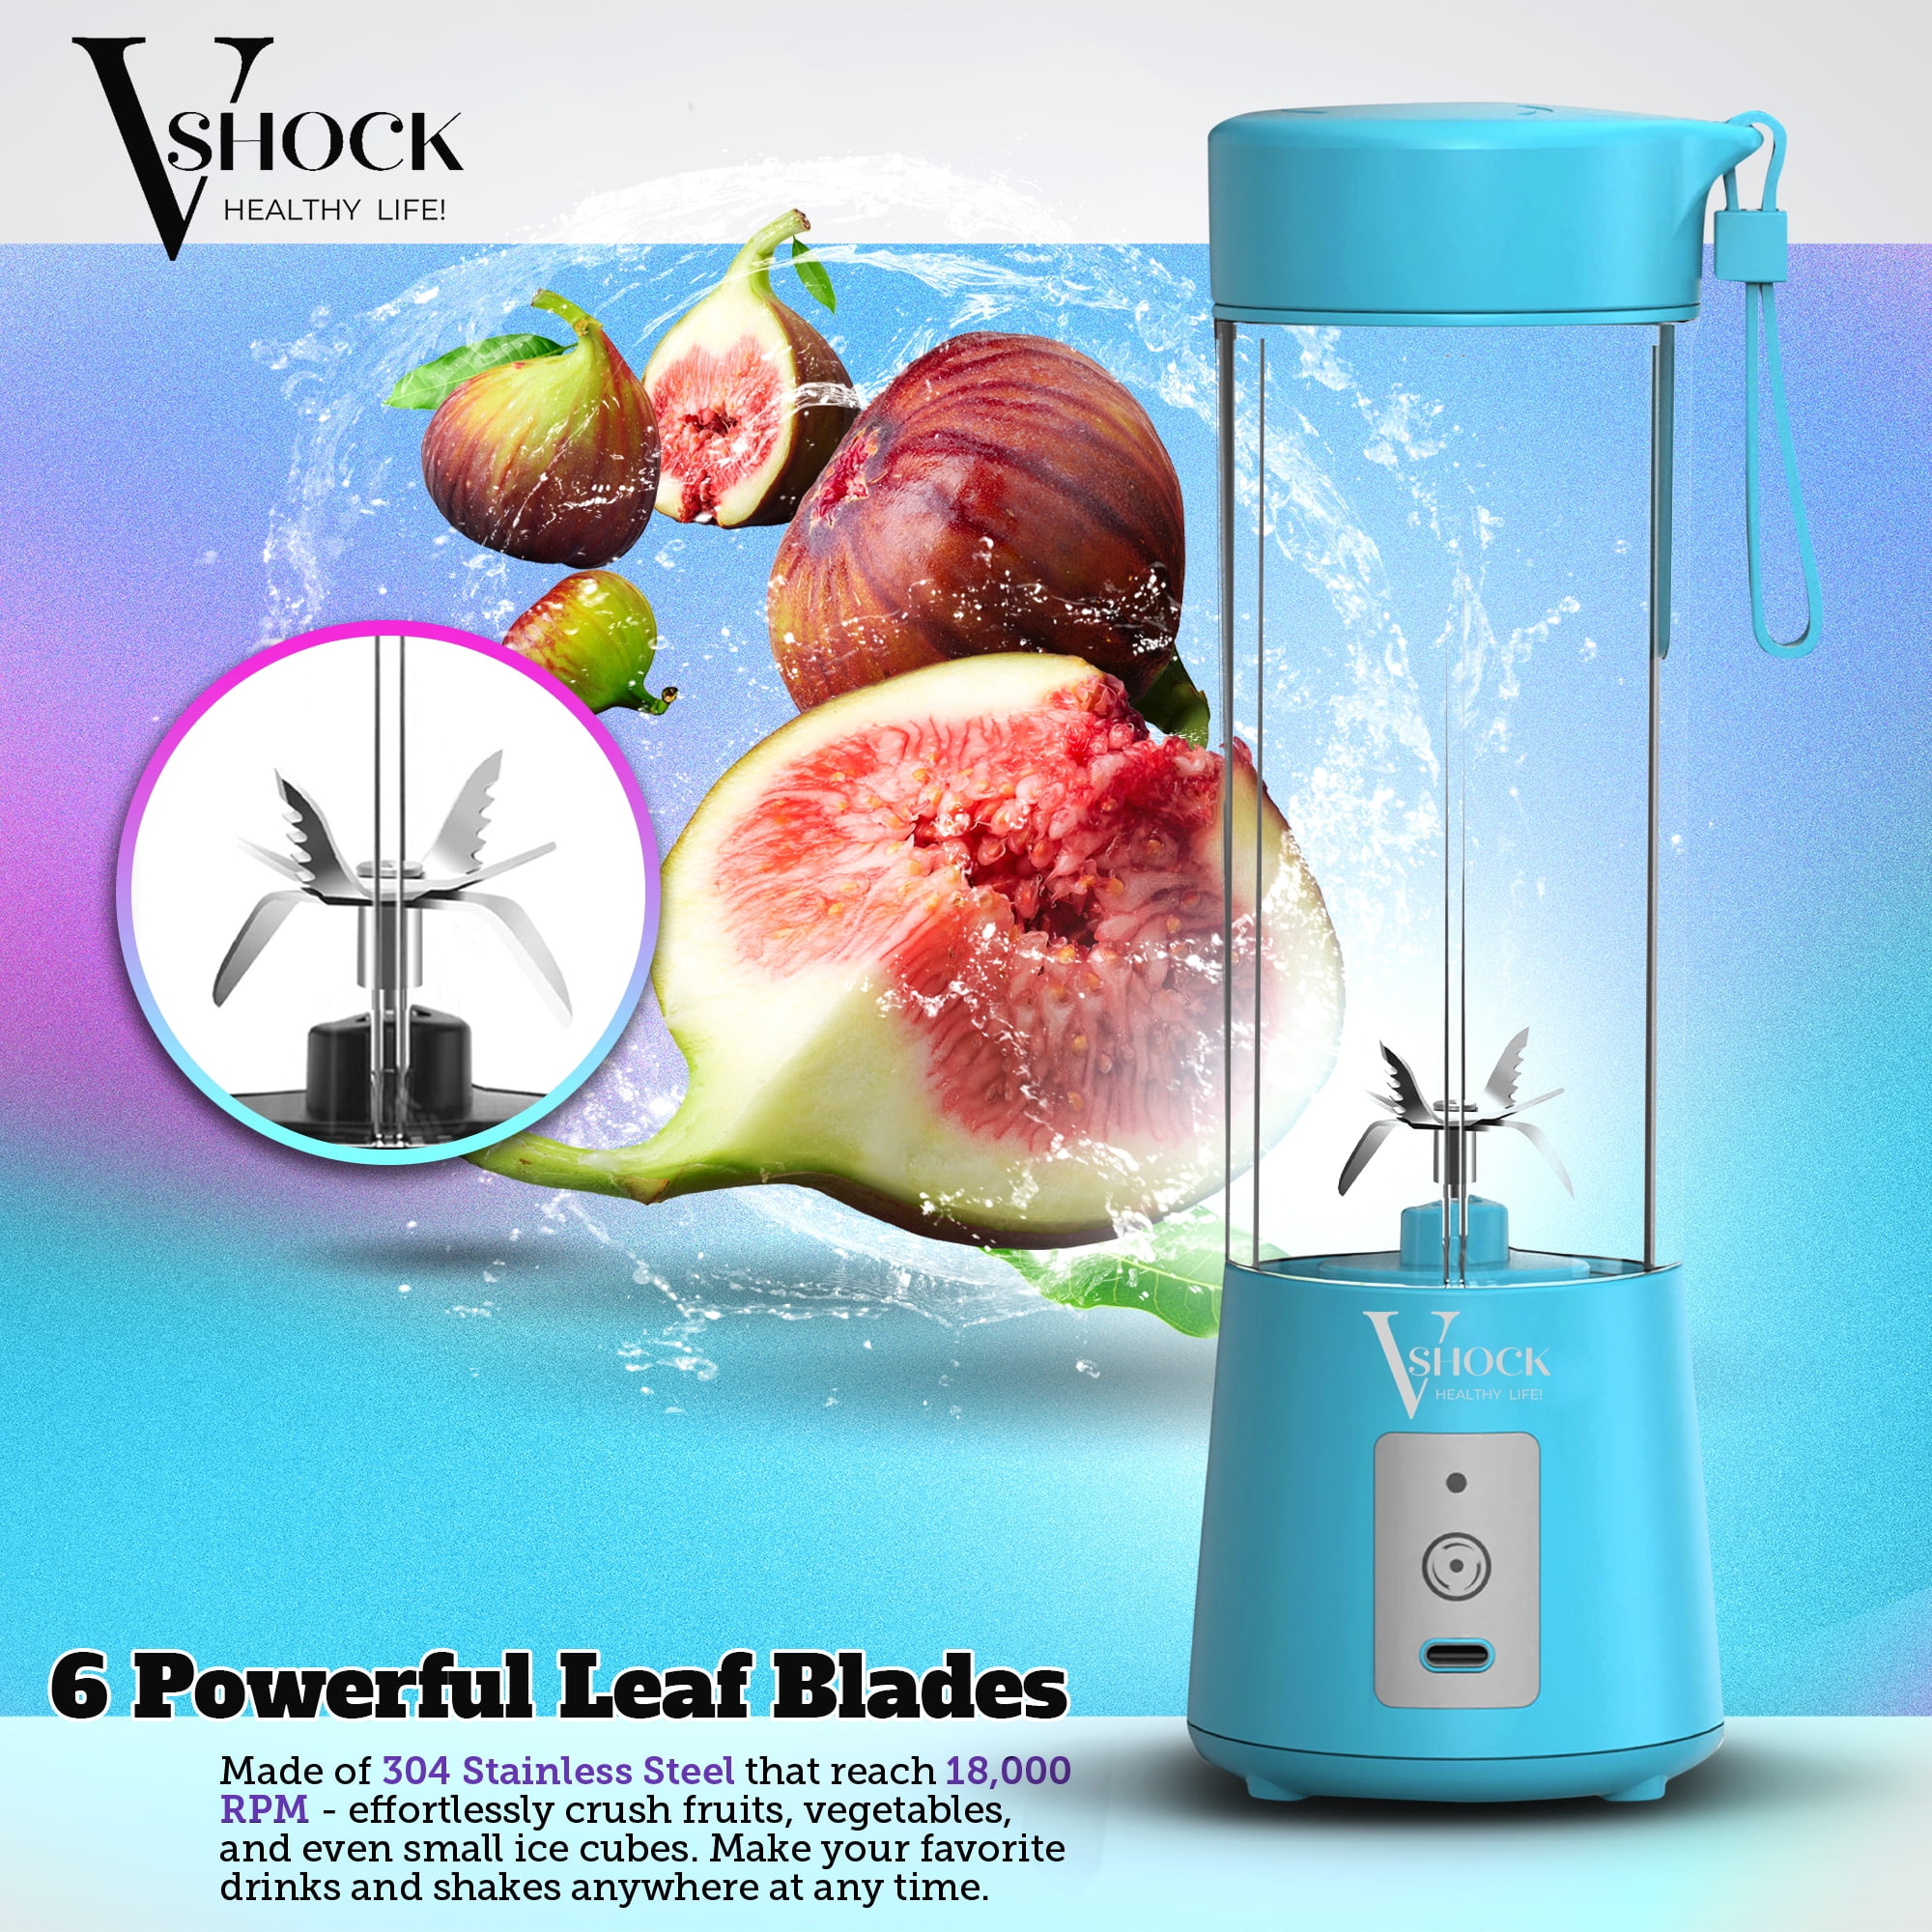 V-Shock Mini Cordless Portable Personal Blender for Shakes and Smoothies,  USB Rechargeable, 16 oz. Jar with Leakproof Travel Lid, 6 Stainless Steel  Blades - Blue 